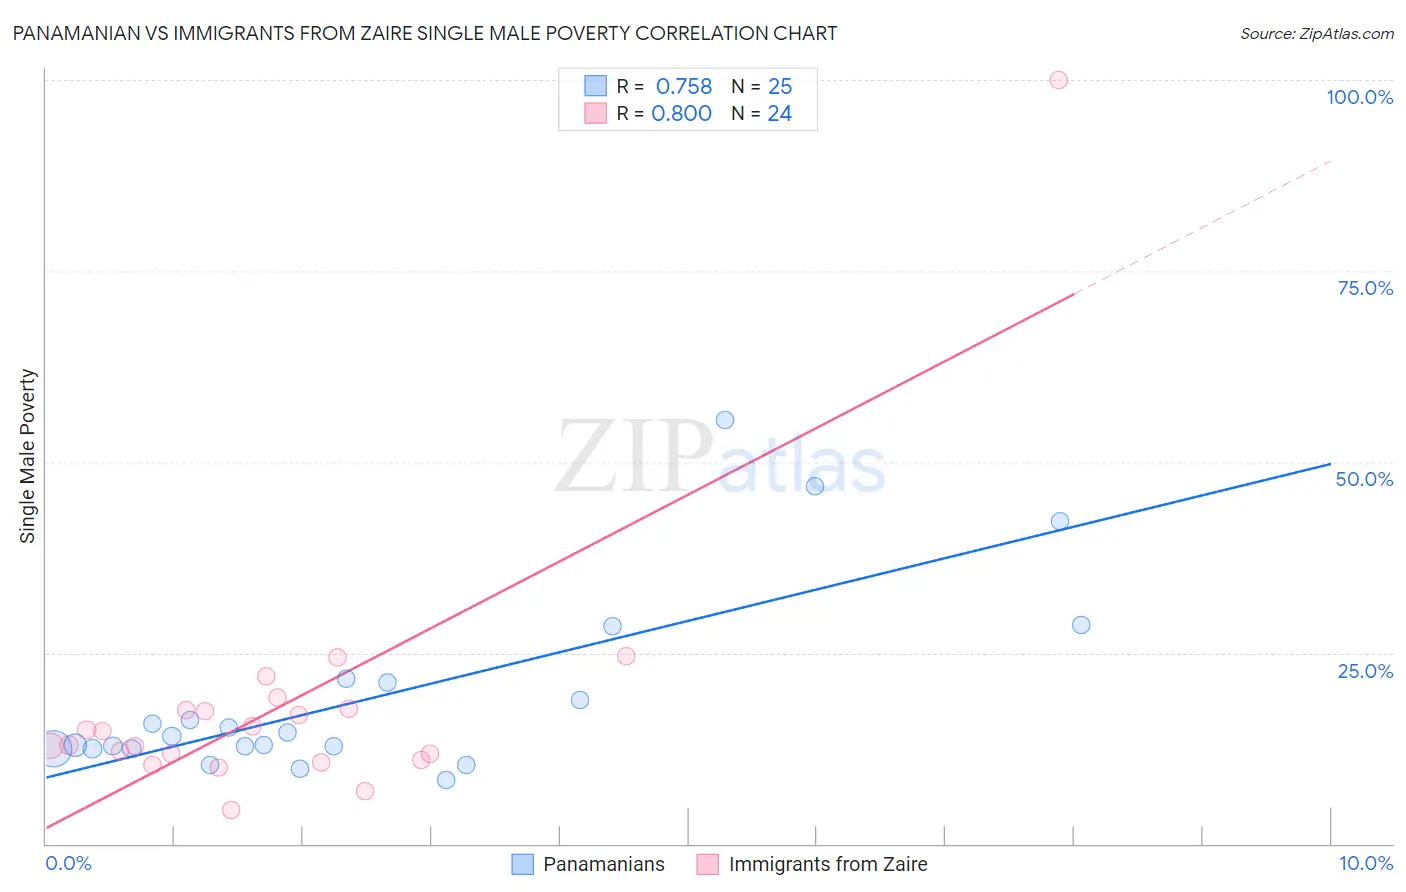 Panamanian vs Immigrants from Zaire Single Male Poverty